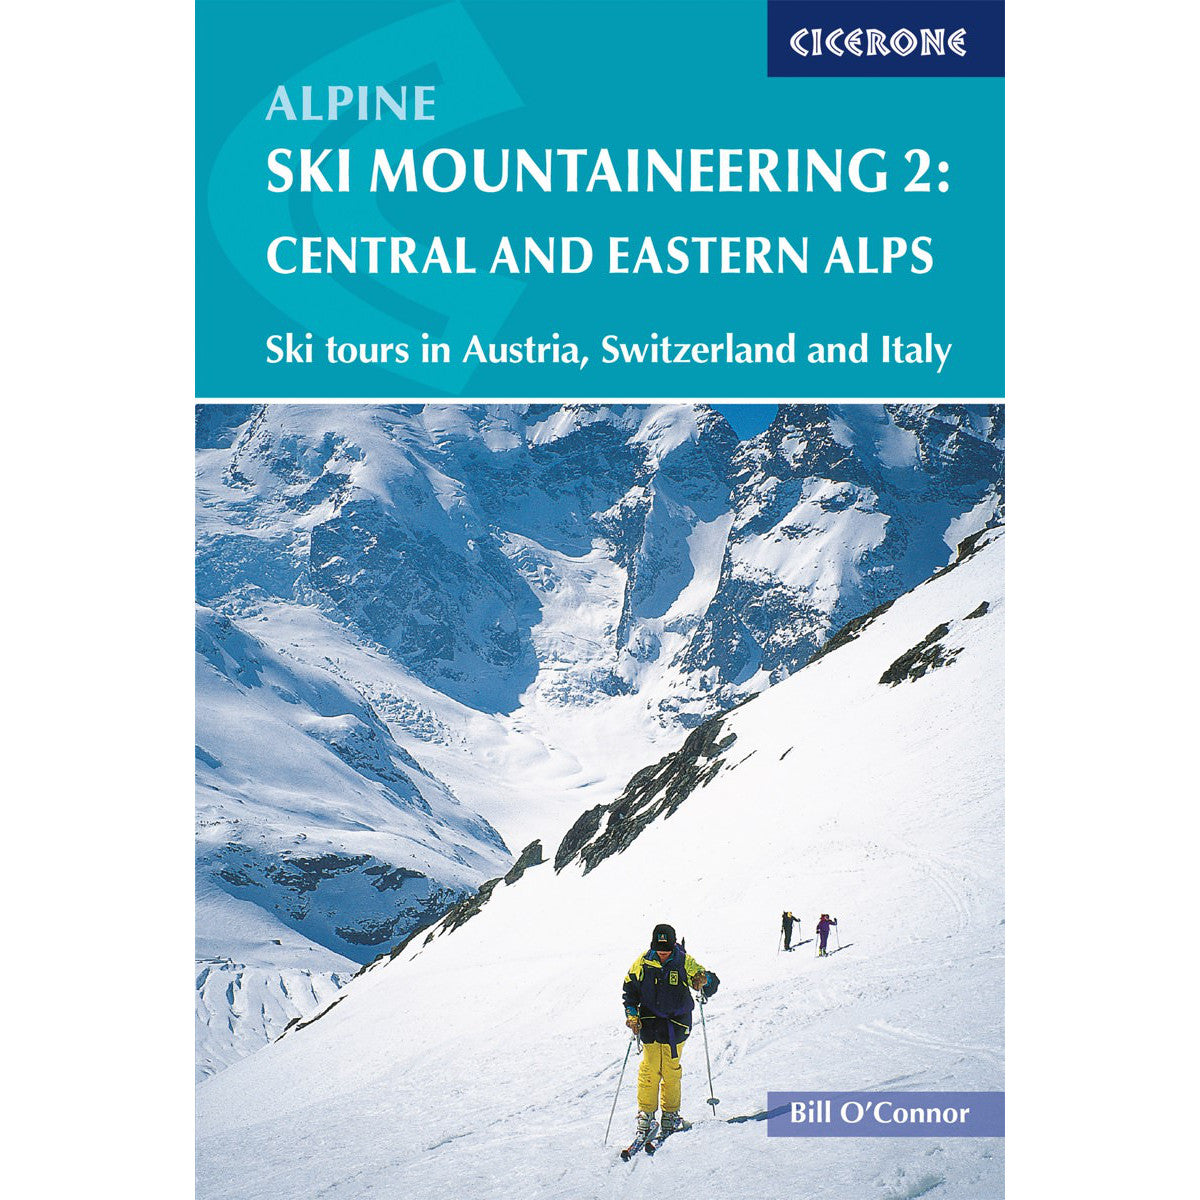 Ski Mountaineering 2: Central and Eastern Alps | Backcountry Books